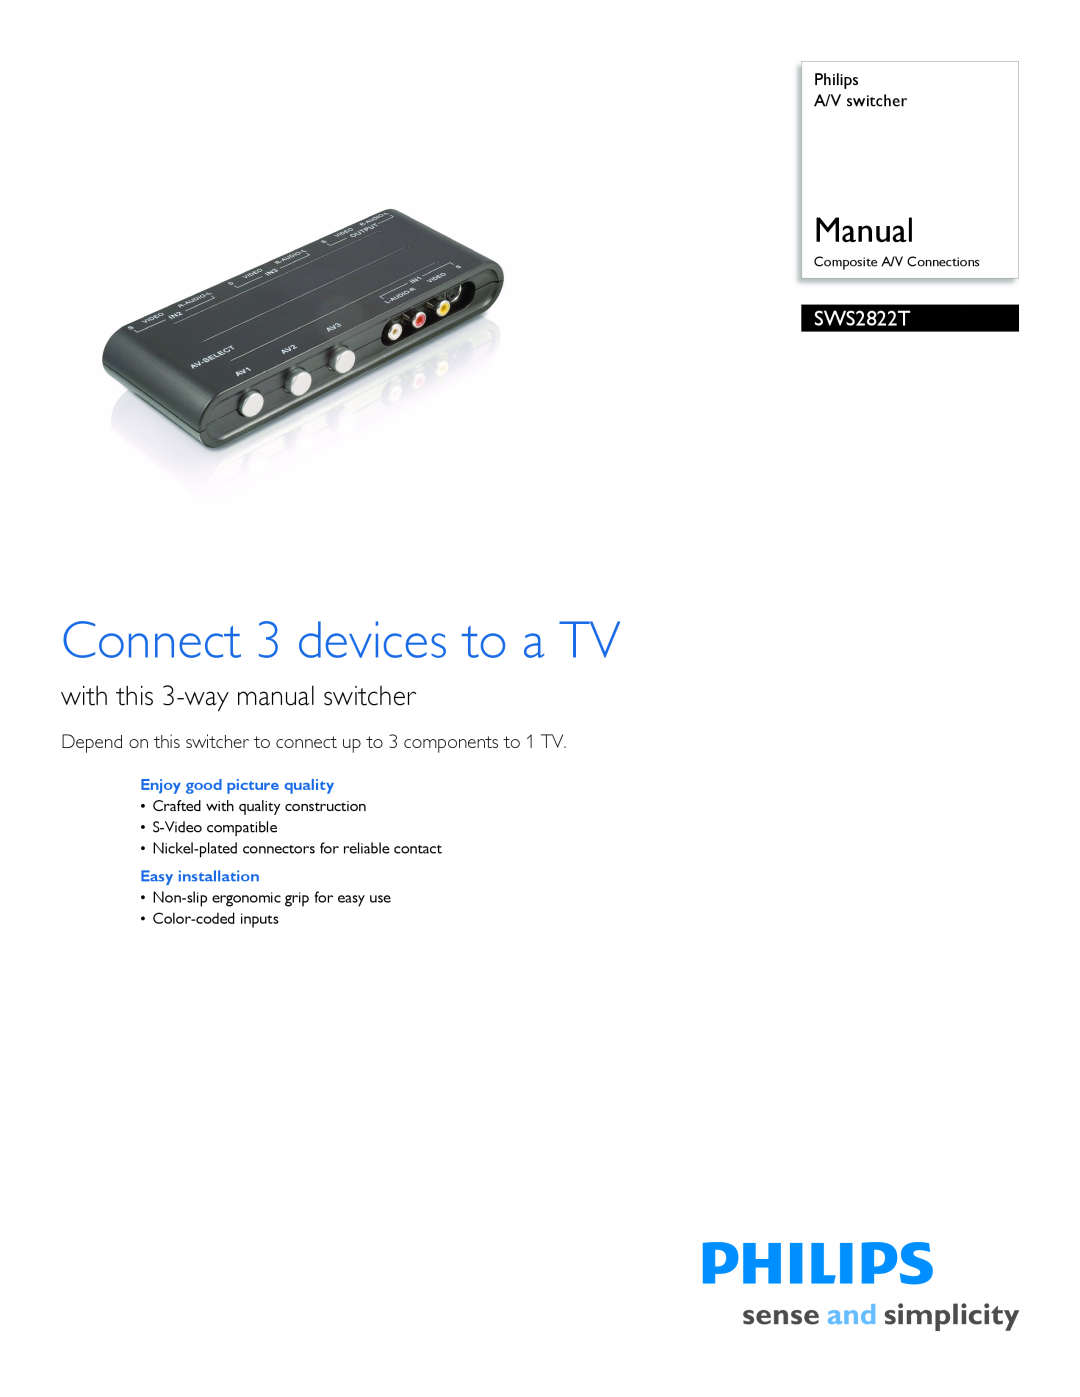 Philips SWS2822T/17 manual Philips A/V switcher, Enjoy good picture quality, Easy installation, Connect 3 devices to a TV 